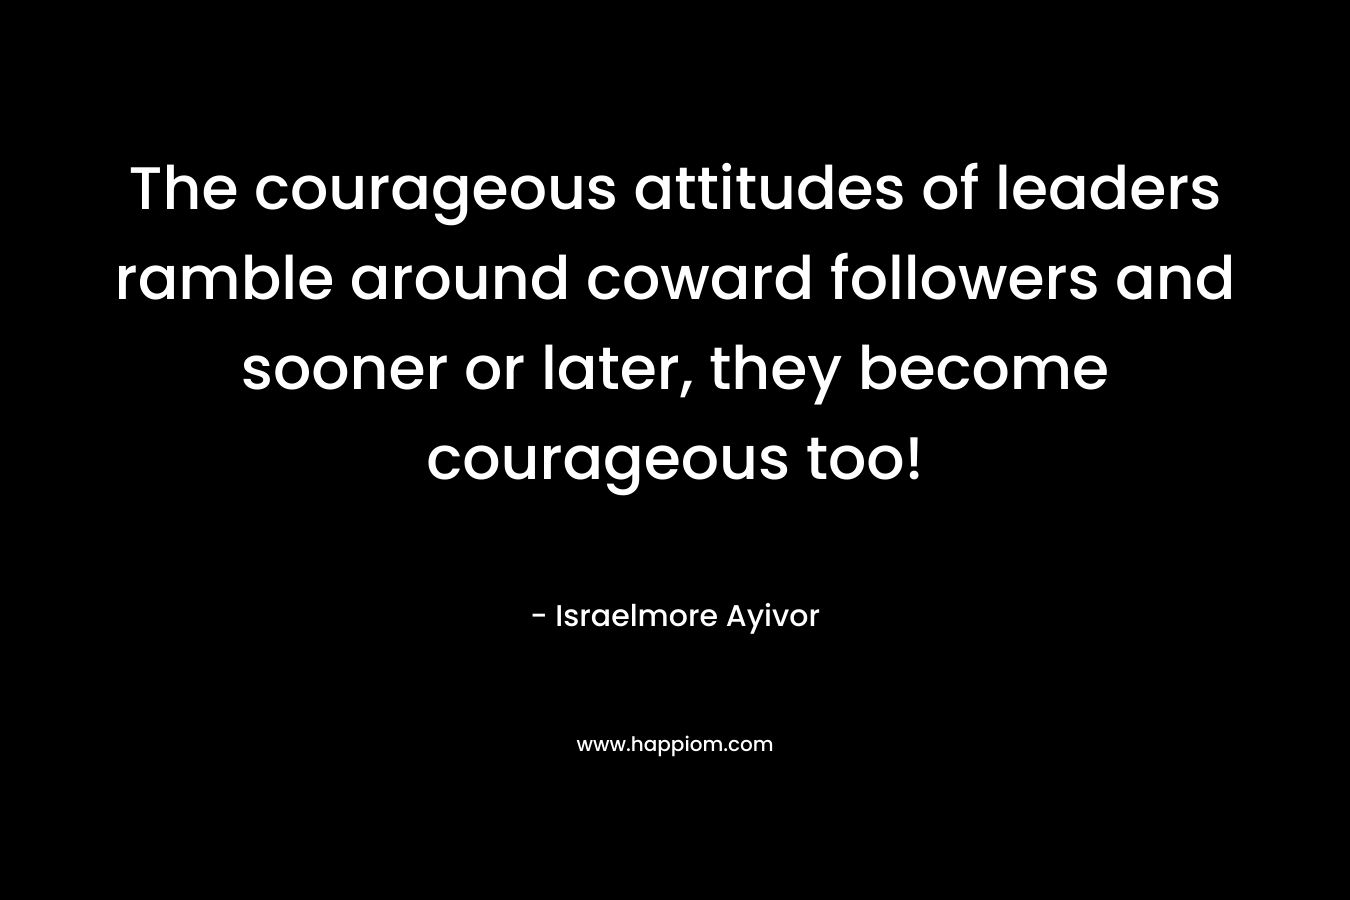 The courageous attitudes of leaders ramble around coward followers and sooner or later, they become courageous too!